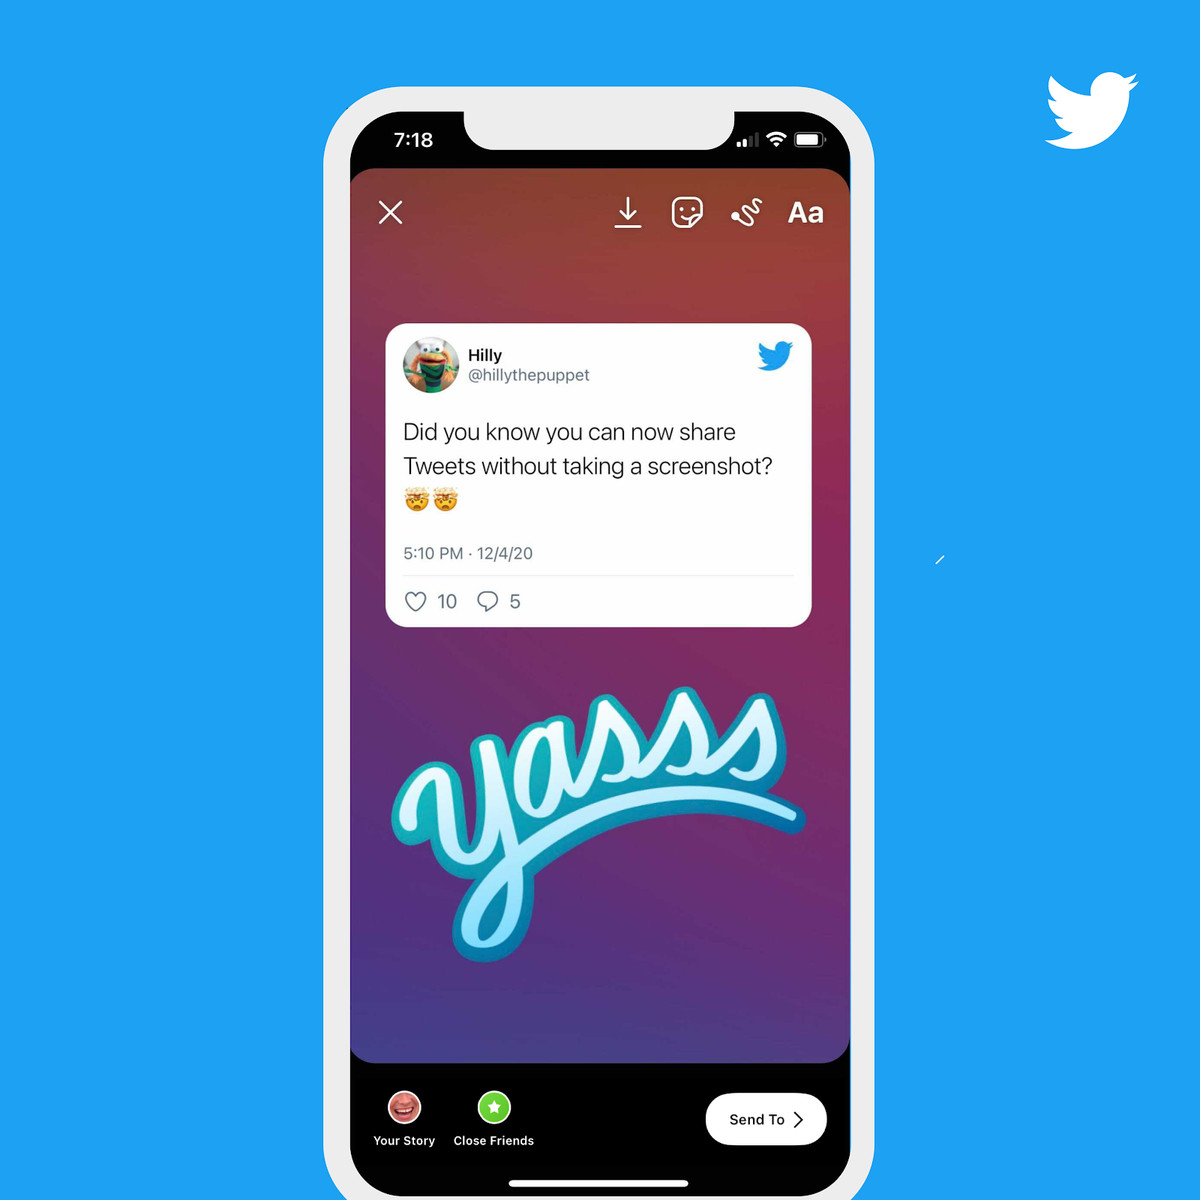 Image of a tweet that has been embedded into an Instagram story